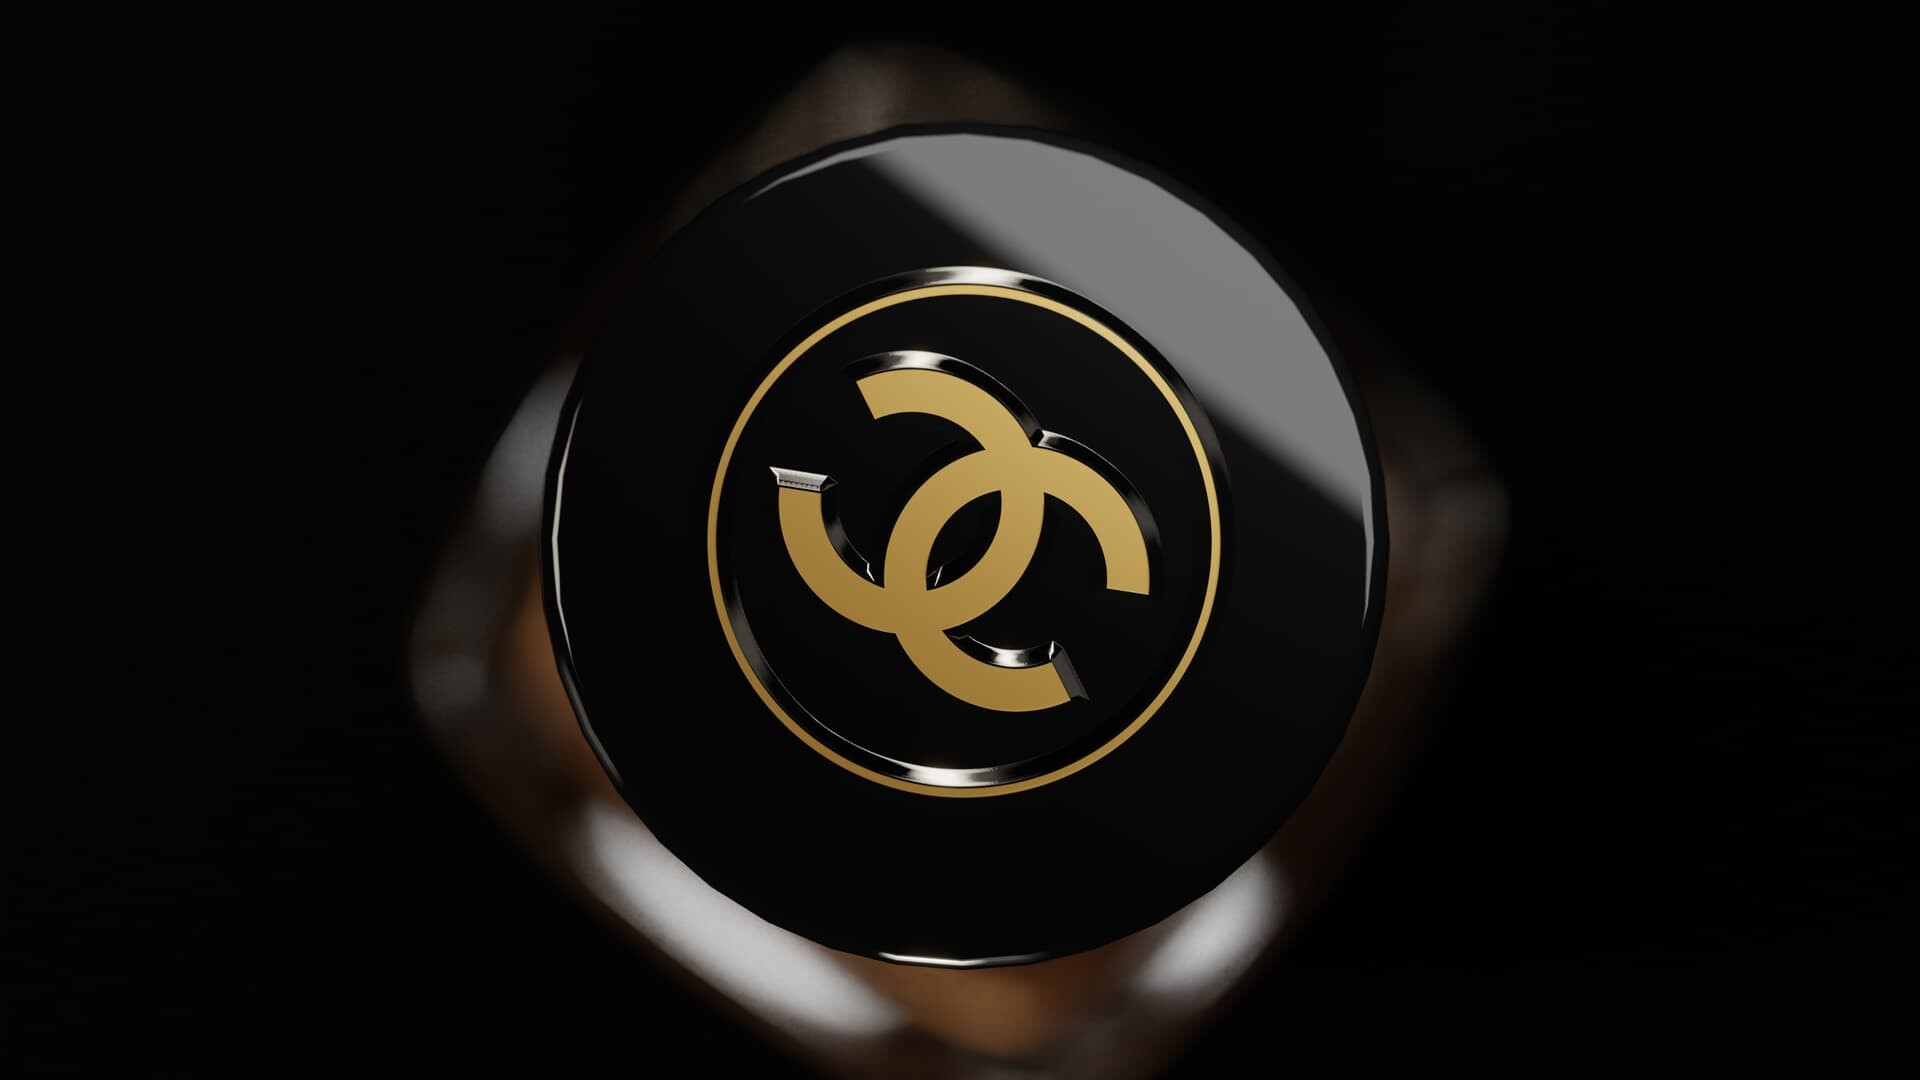 Chanel: A brand known for combining traditional art with avant-garde creative expression. 1920x1080 Full HD Wallpaper.